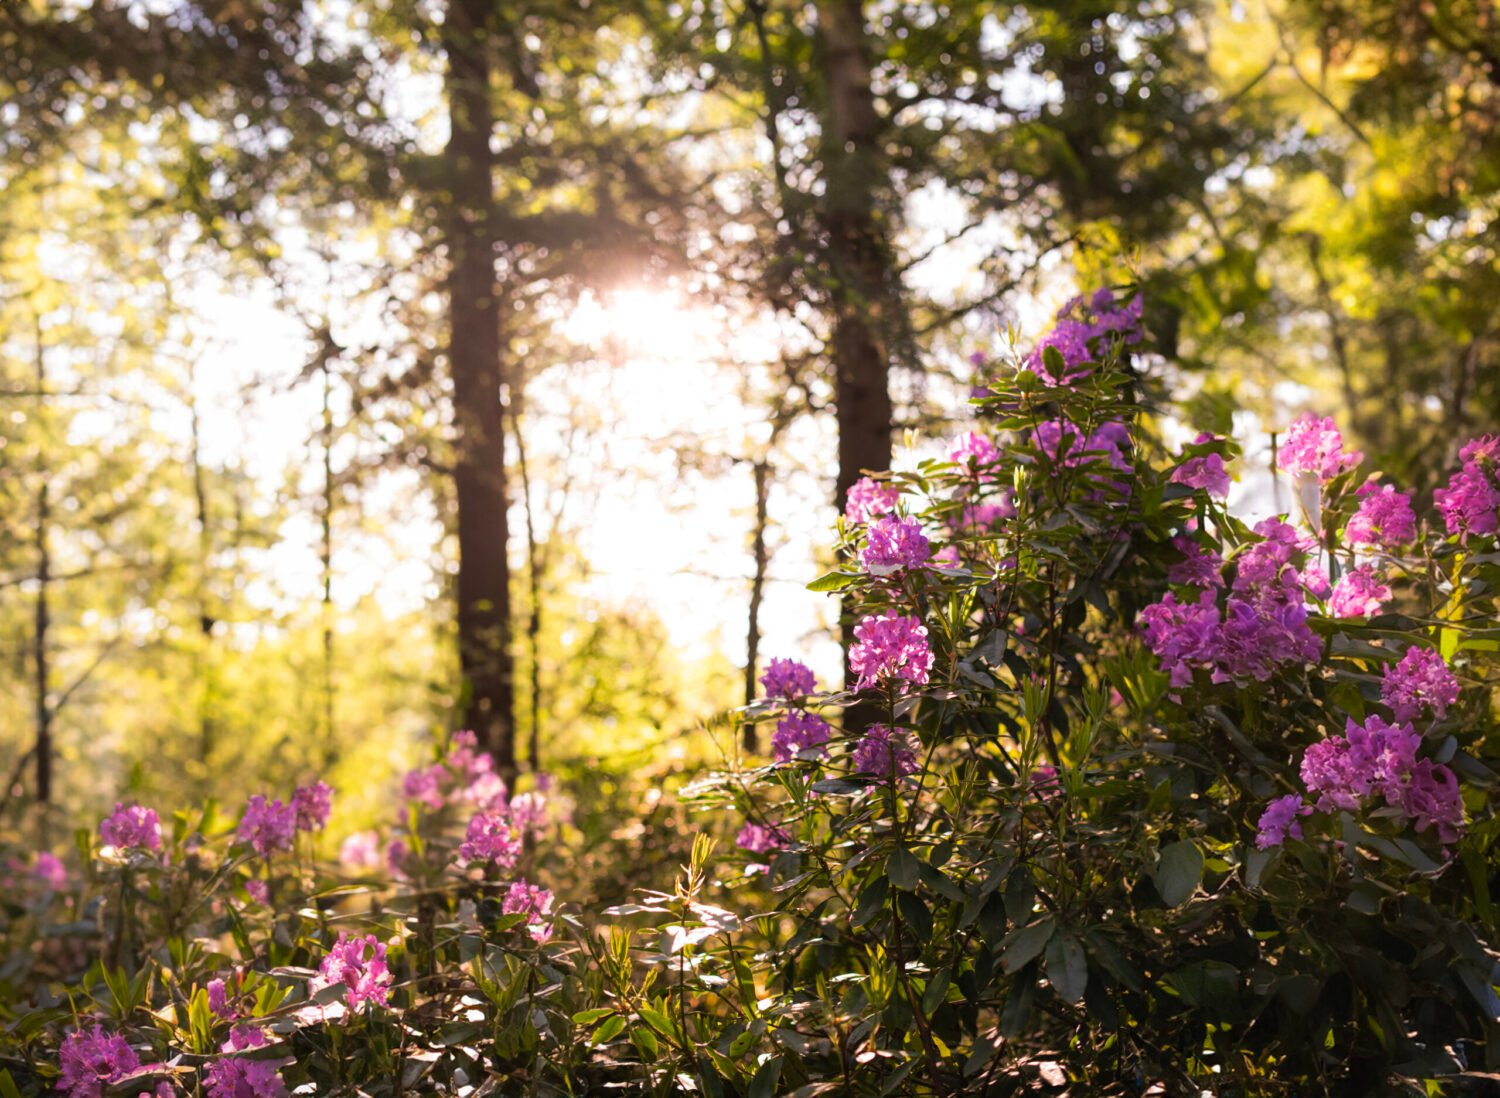 Sunlight filtering through trees onto blooming purple flowers.